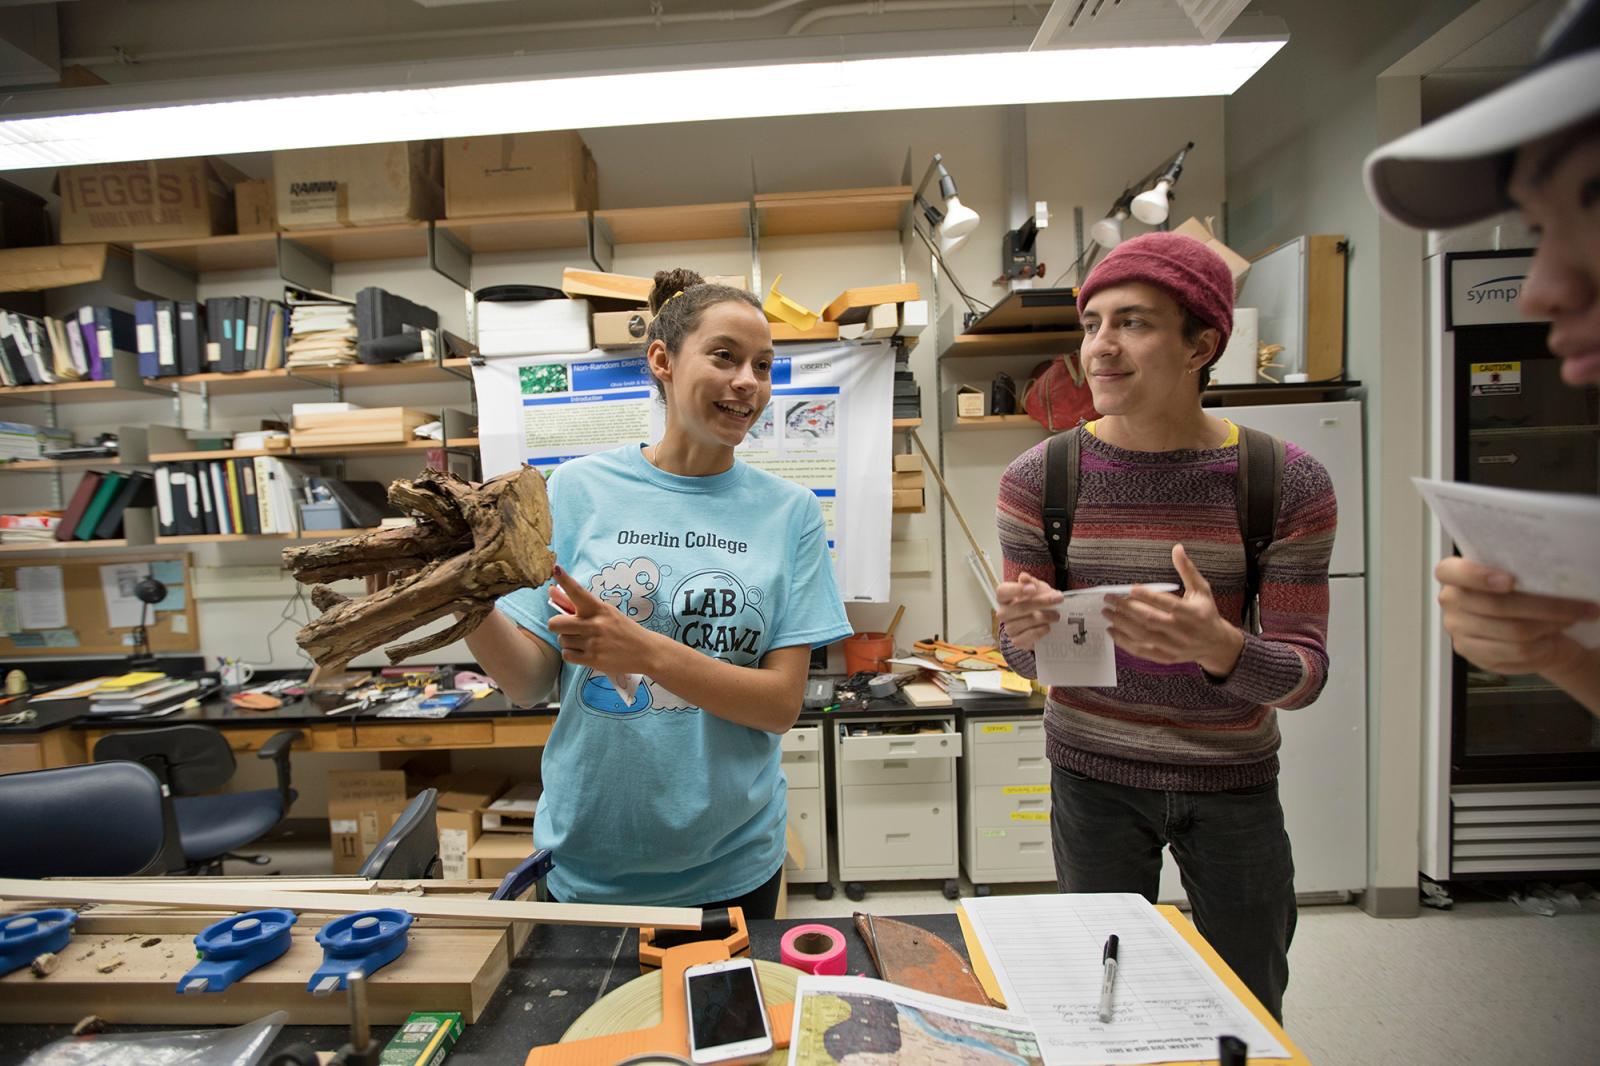 At a lab table, a student in a 'Lab Crawl' t-shirt holds up part of a tree branch or stump.